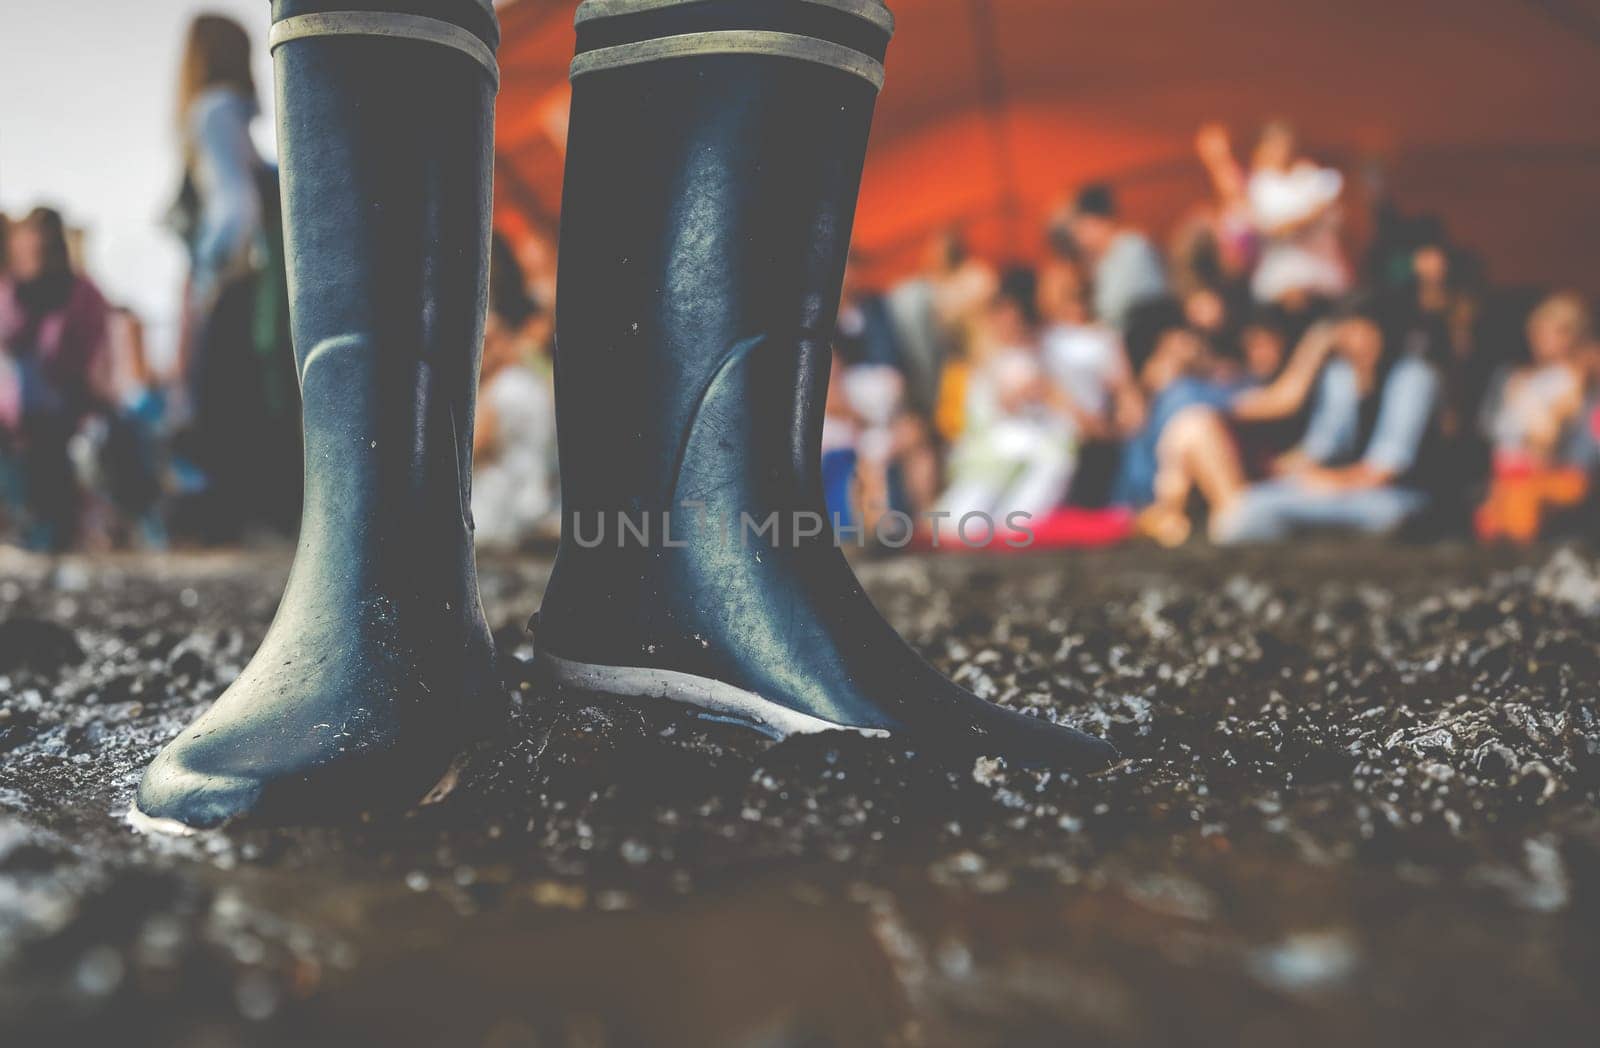 Rubber Boots In The Mud At A Music Festival by mrdoomits